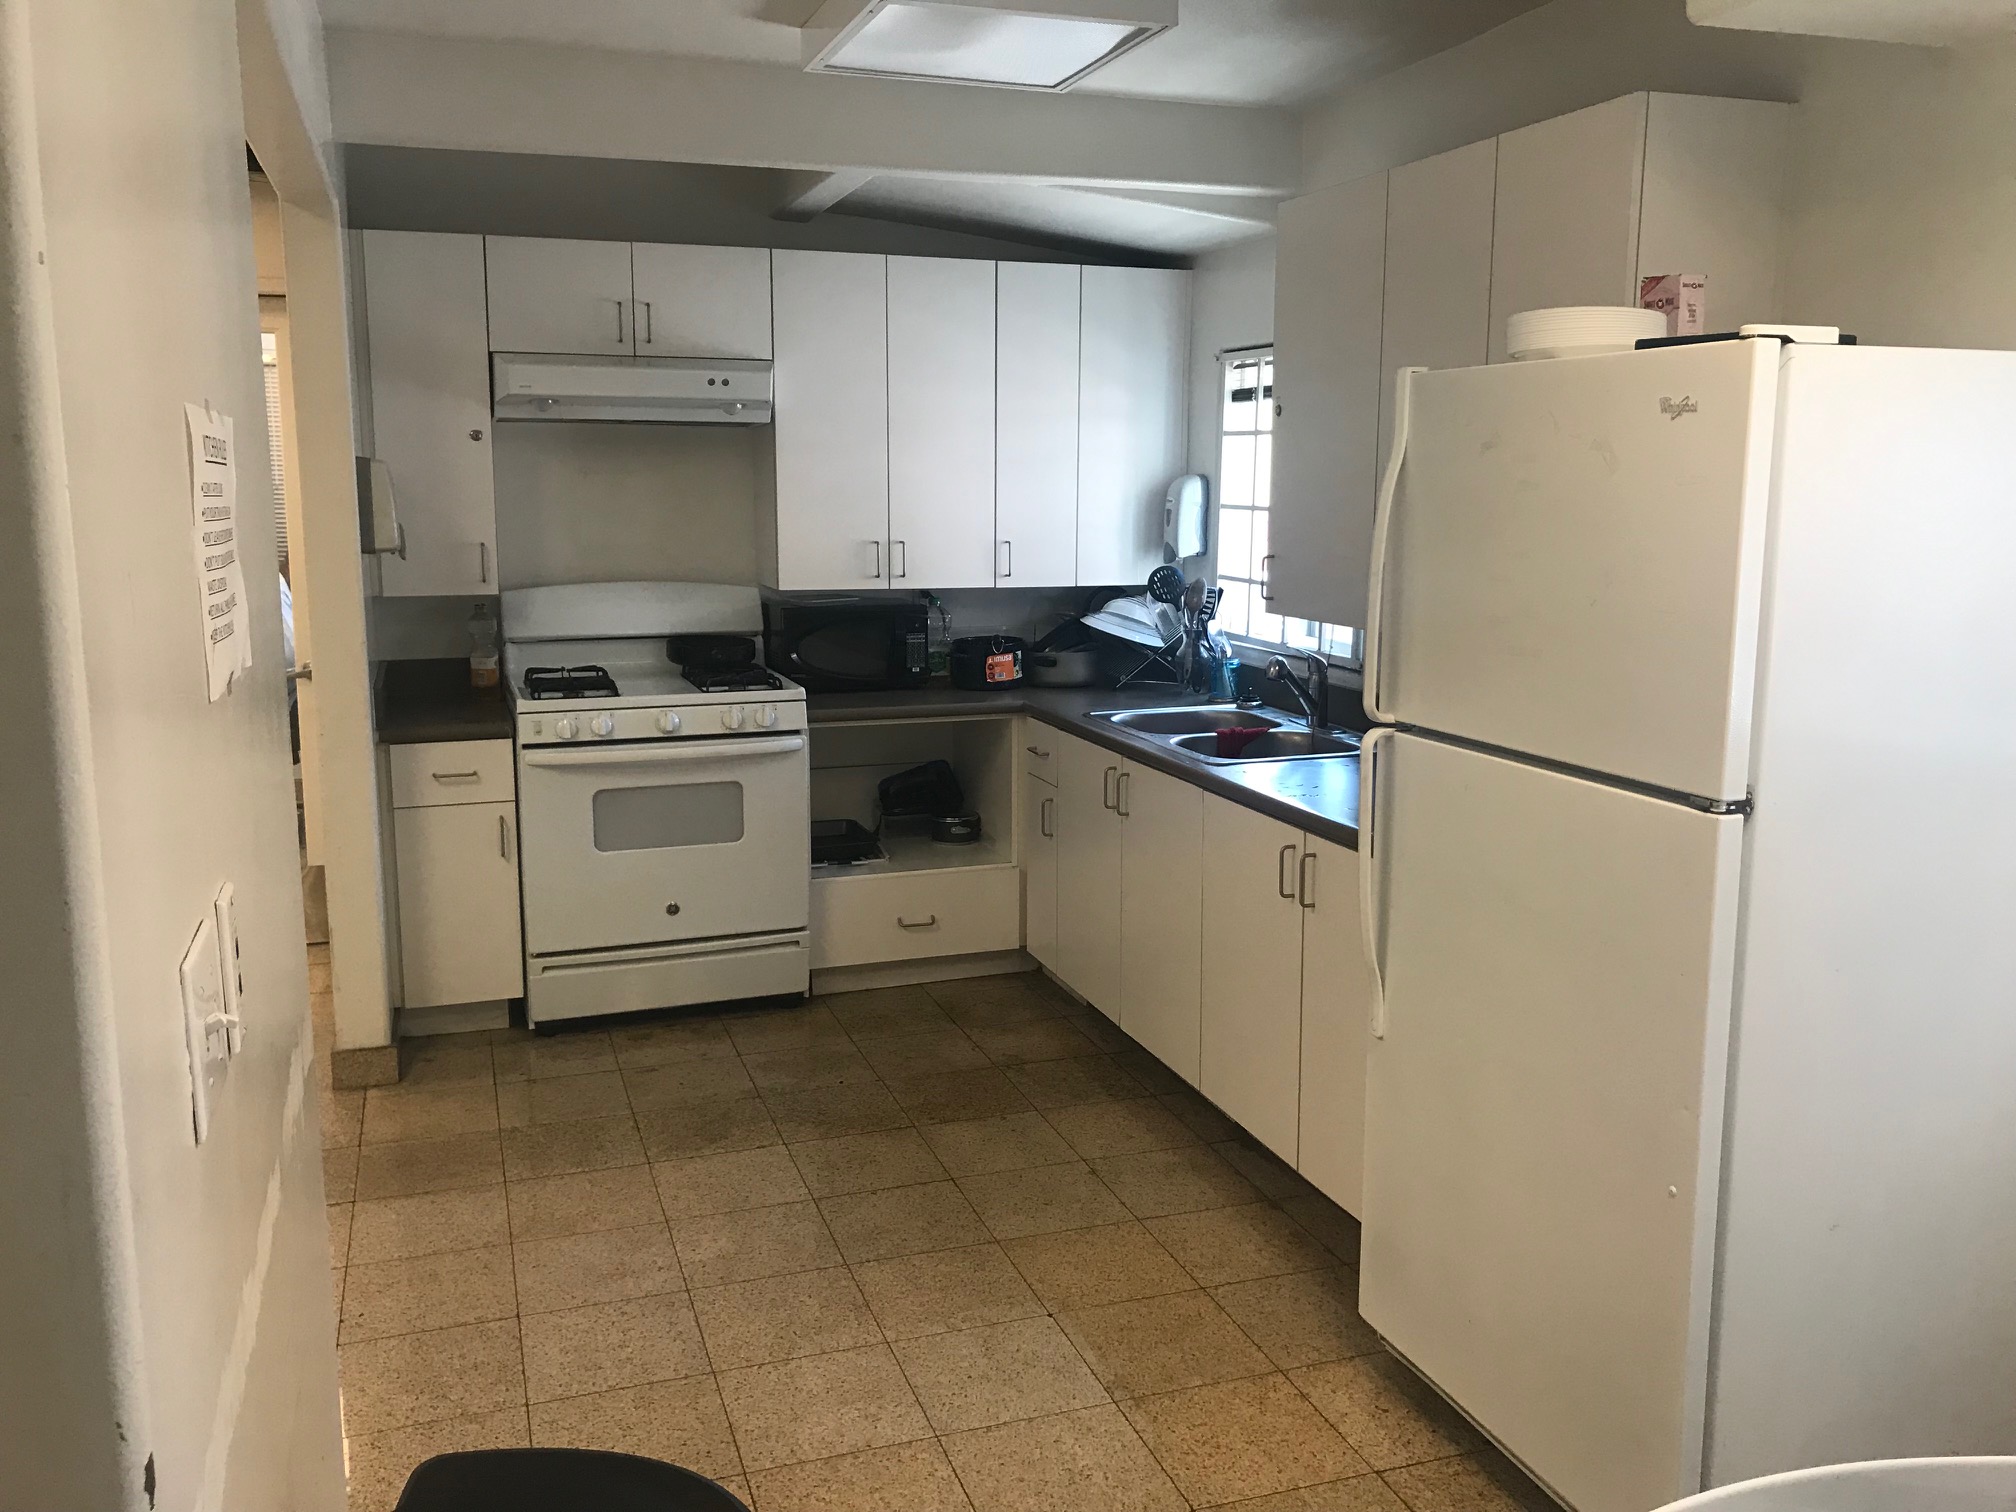 Front side view of a kitchen, white pantry, large cabinets, white stove with oven and under cabinet range hood, black microwave, pots, dishes, gallon of water, coffee maker, soap dispenser, sink, white window, white refrigerator, ceiling lights, and tiled floor.